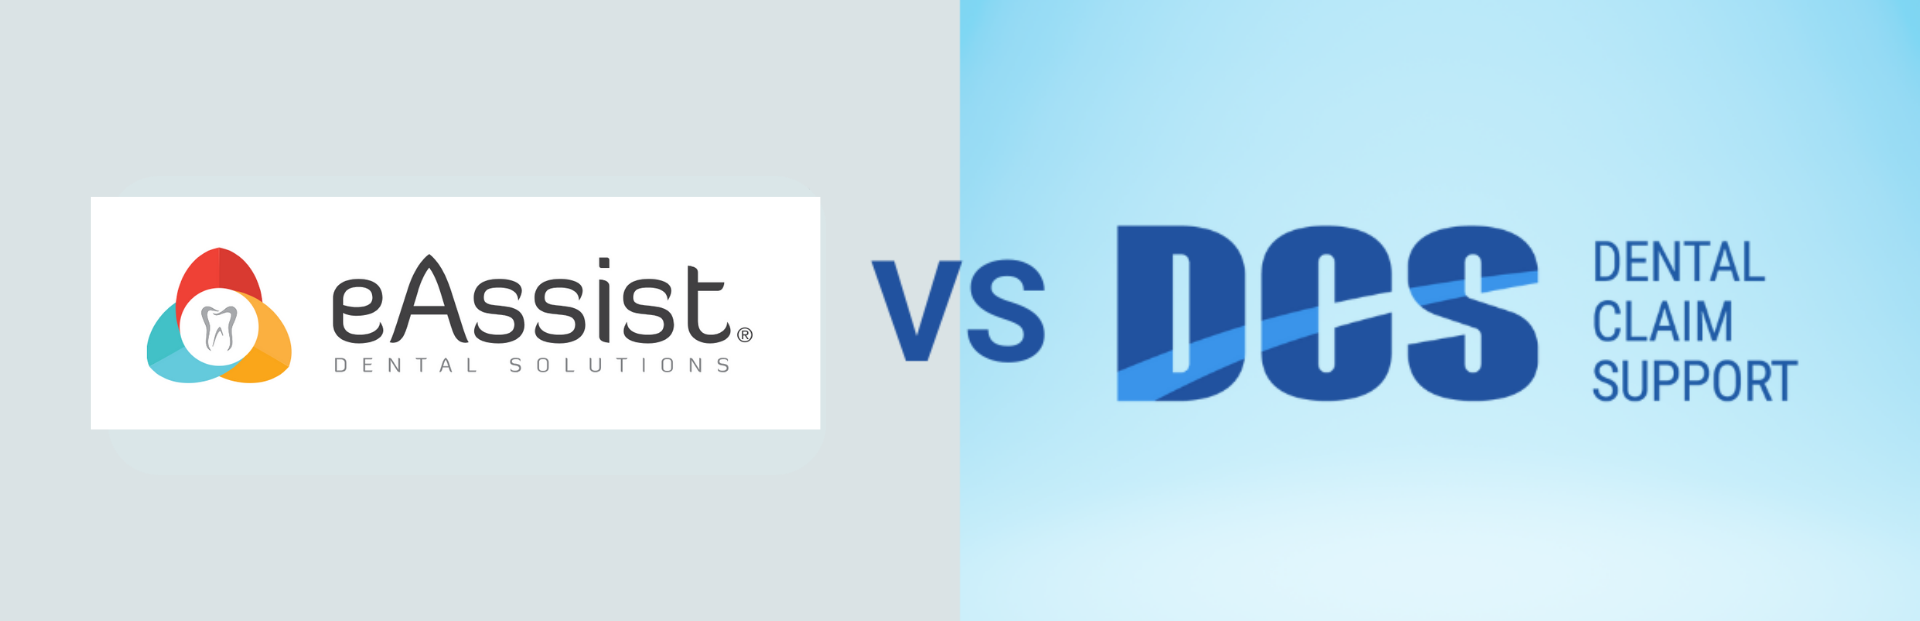 DCS vs eAssist: Let's compare two top RCM companies [7 of 9]